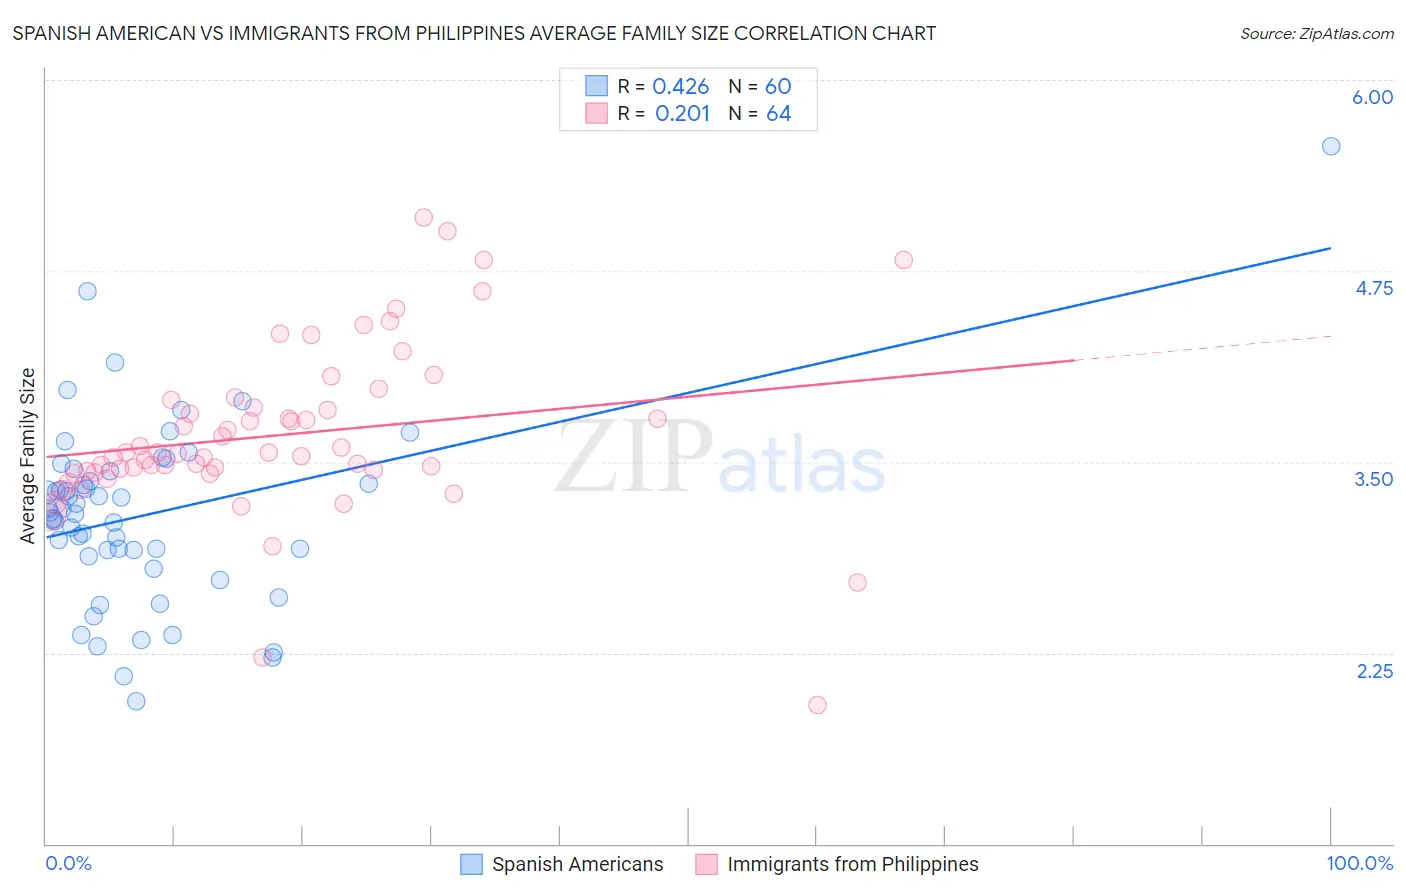 Spanish American vs Immigrants from Philippines Average Family Size